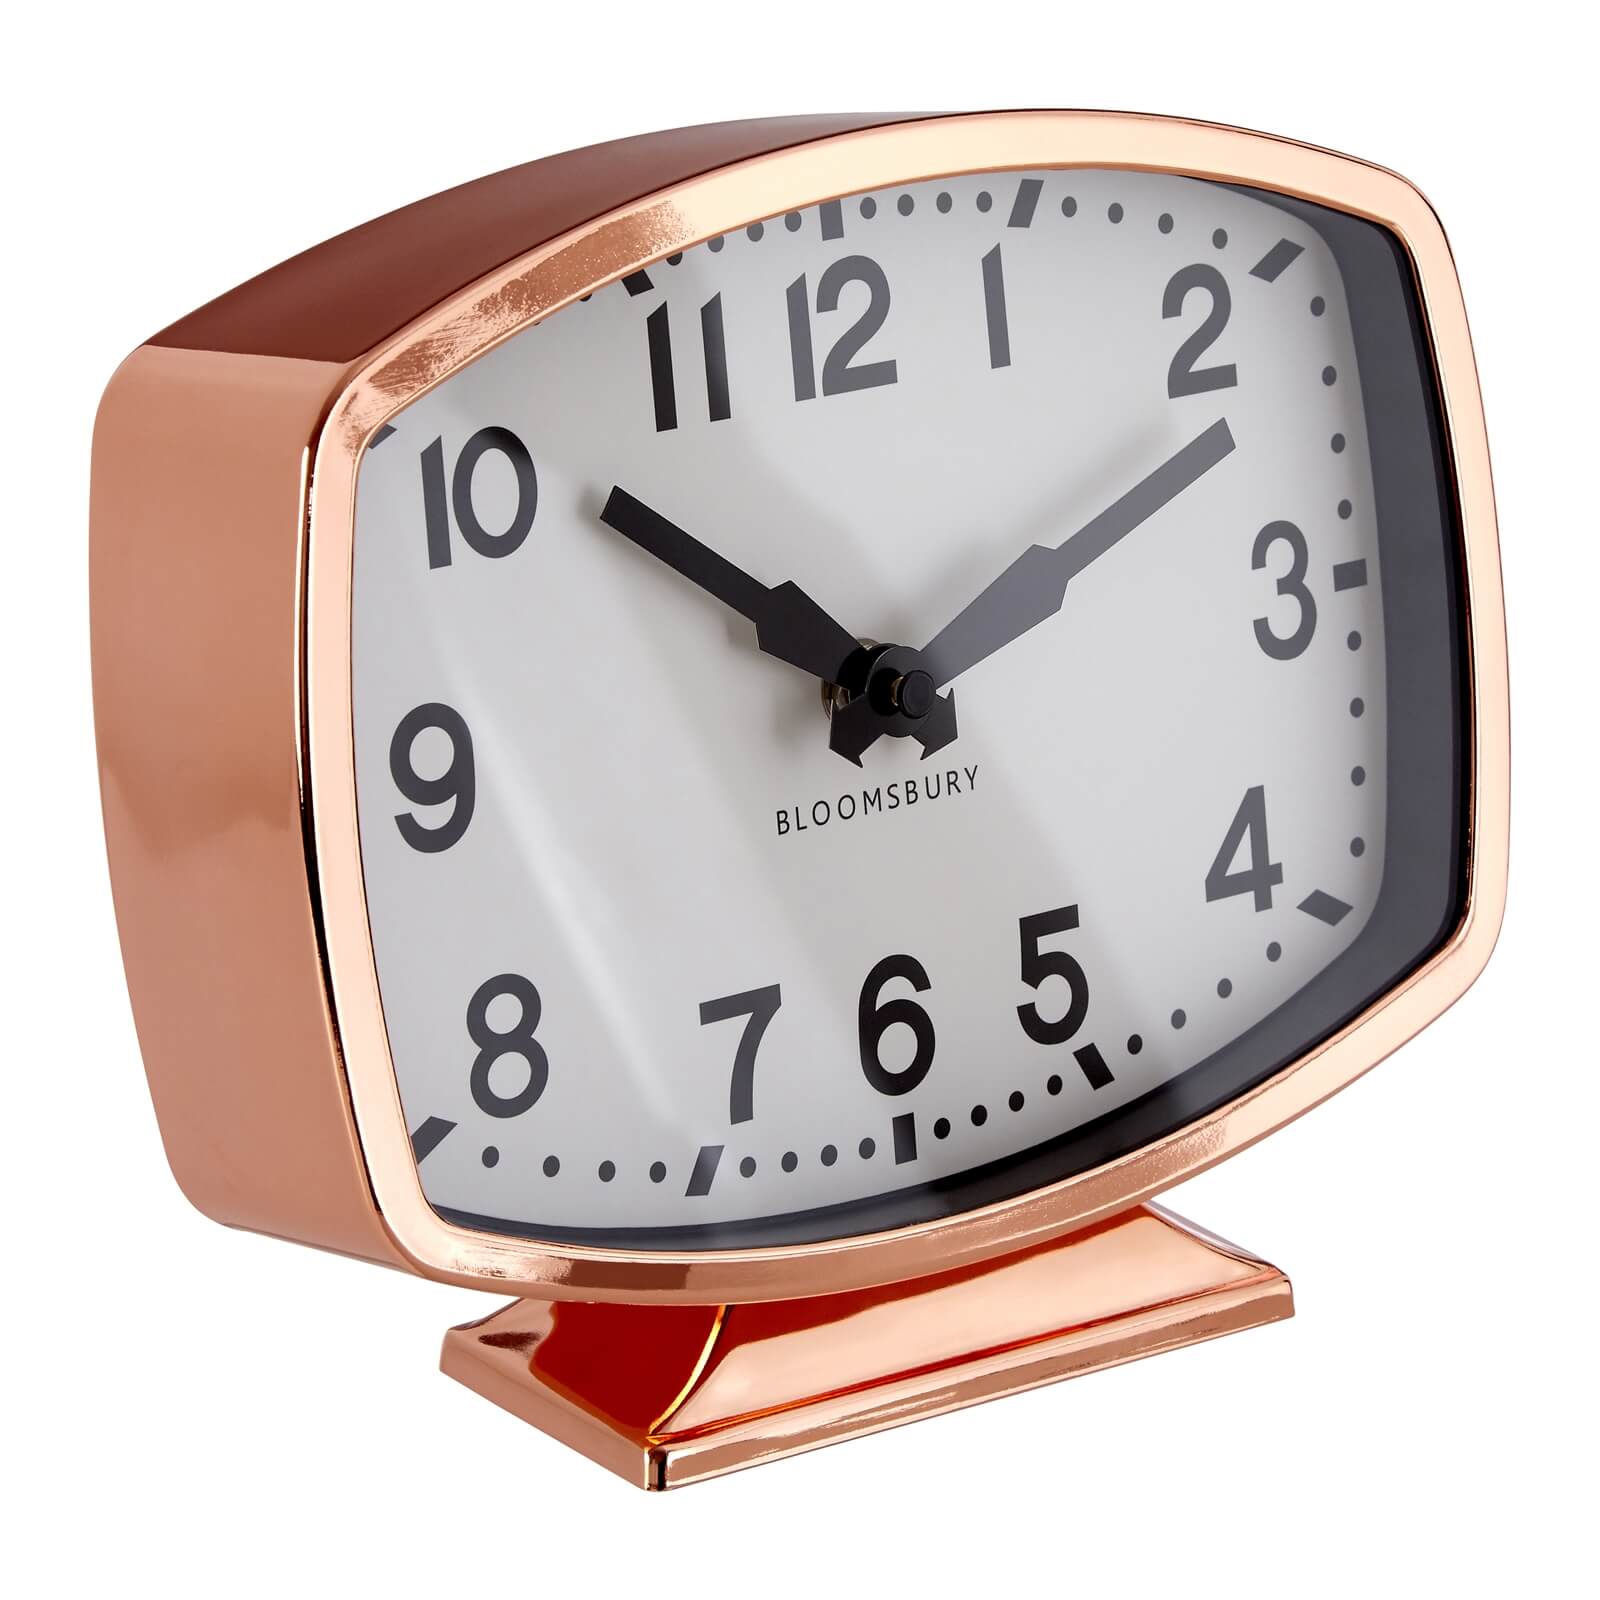 Baillie Table Clock - Rose Gold